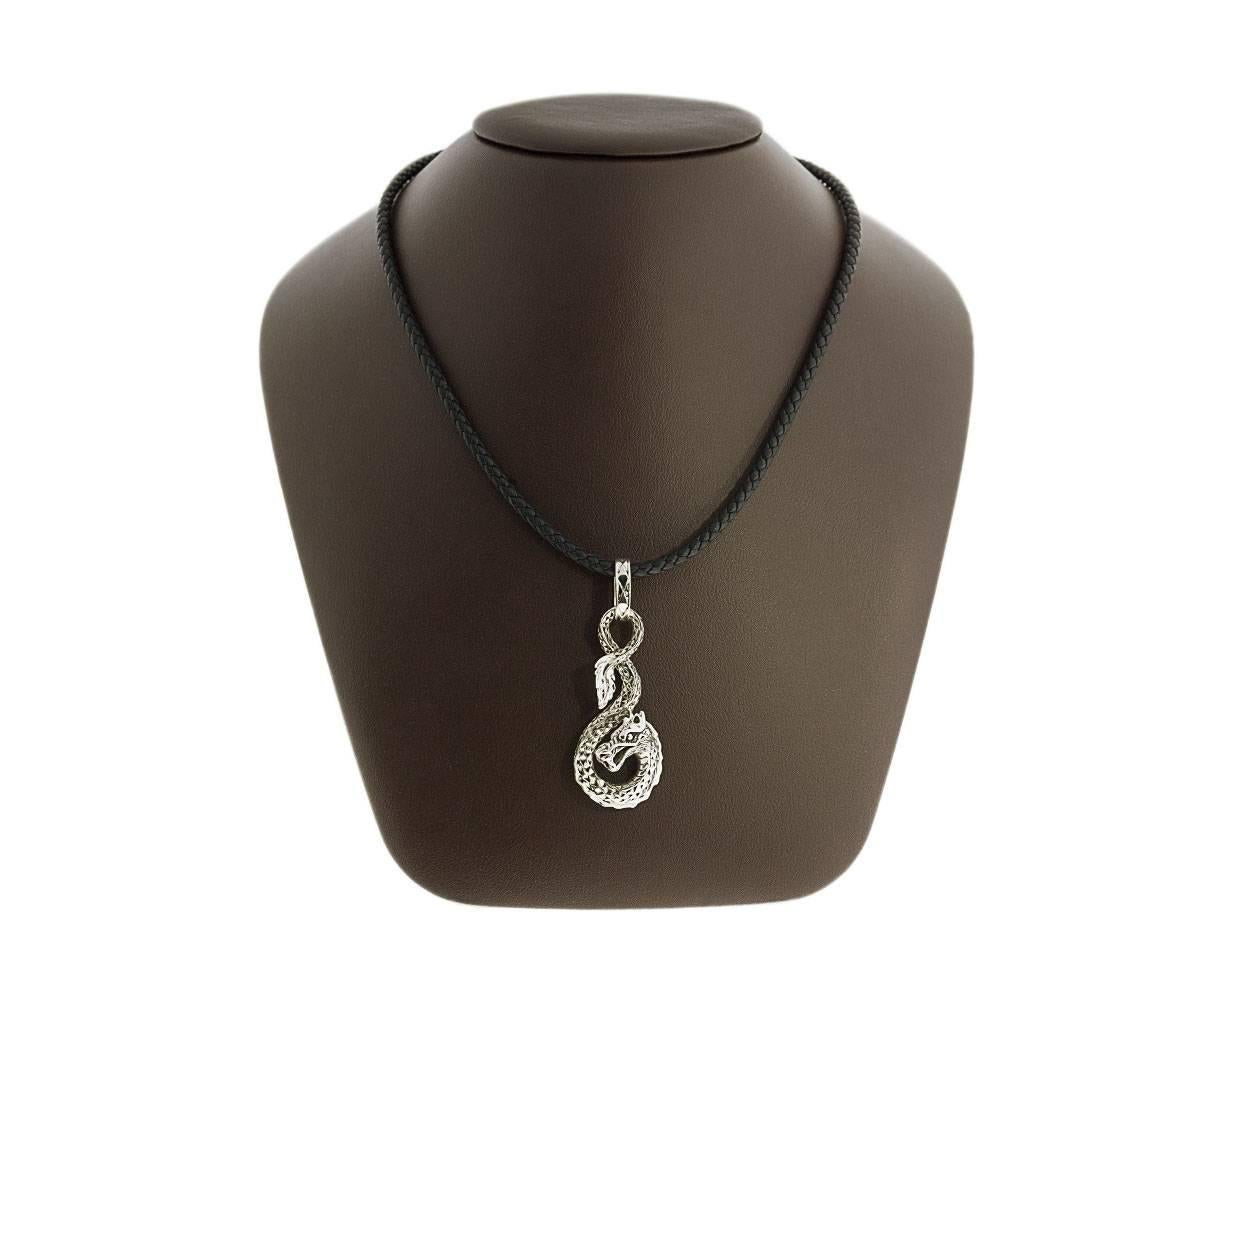 
Each piece of John Hardy jewelry has been crafted in Bali since 1975. John Hardy is dedicated to creating timeless one-of-a-kind pieces that are brilliantly alive.

This sterling silver pendant necklace is from John Hardy's signature Naga